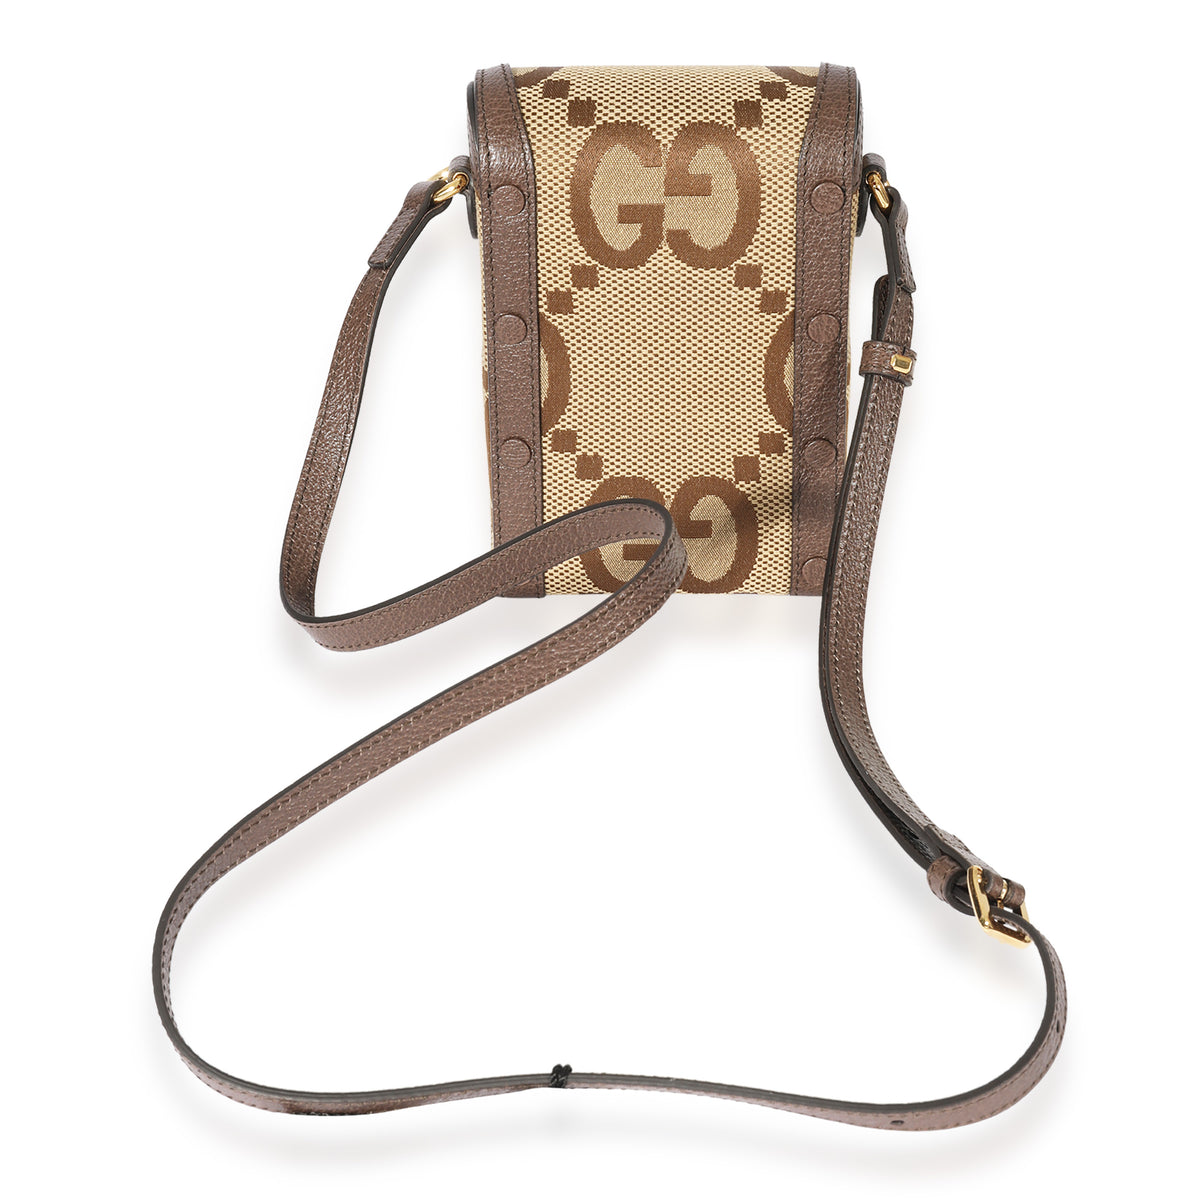 Gucci Ophidia Bag Mini Jumbo GG Camel/Ebony in Canvas/Leather with